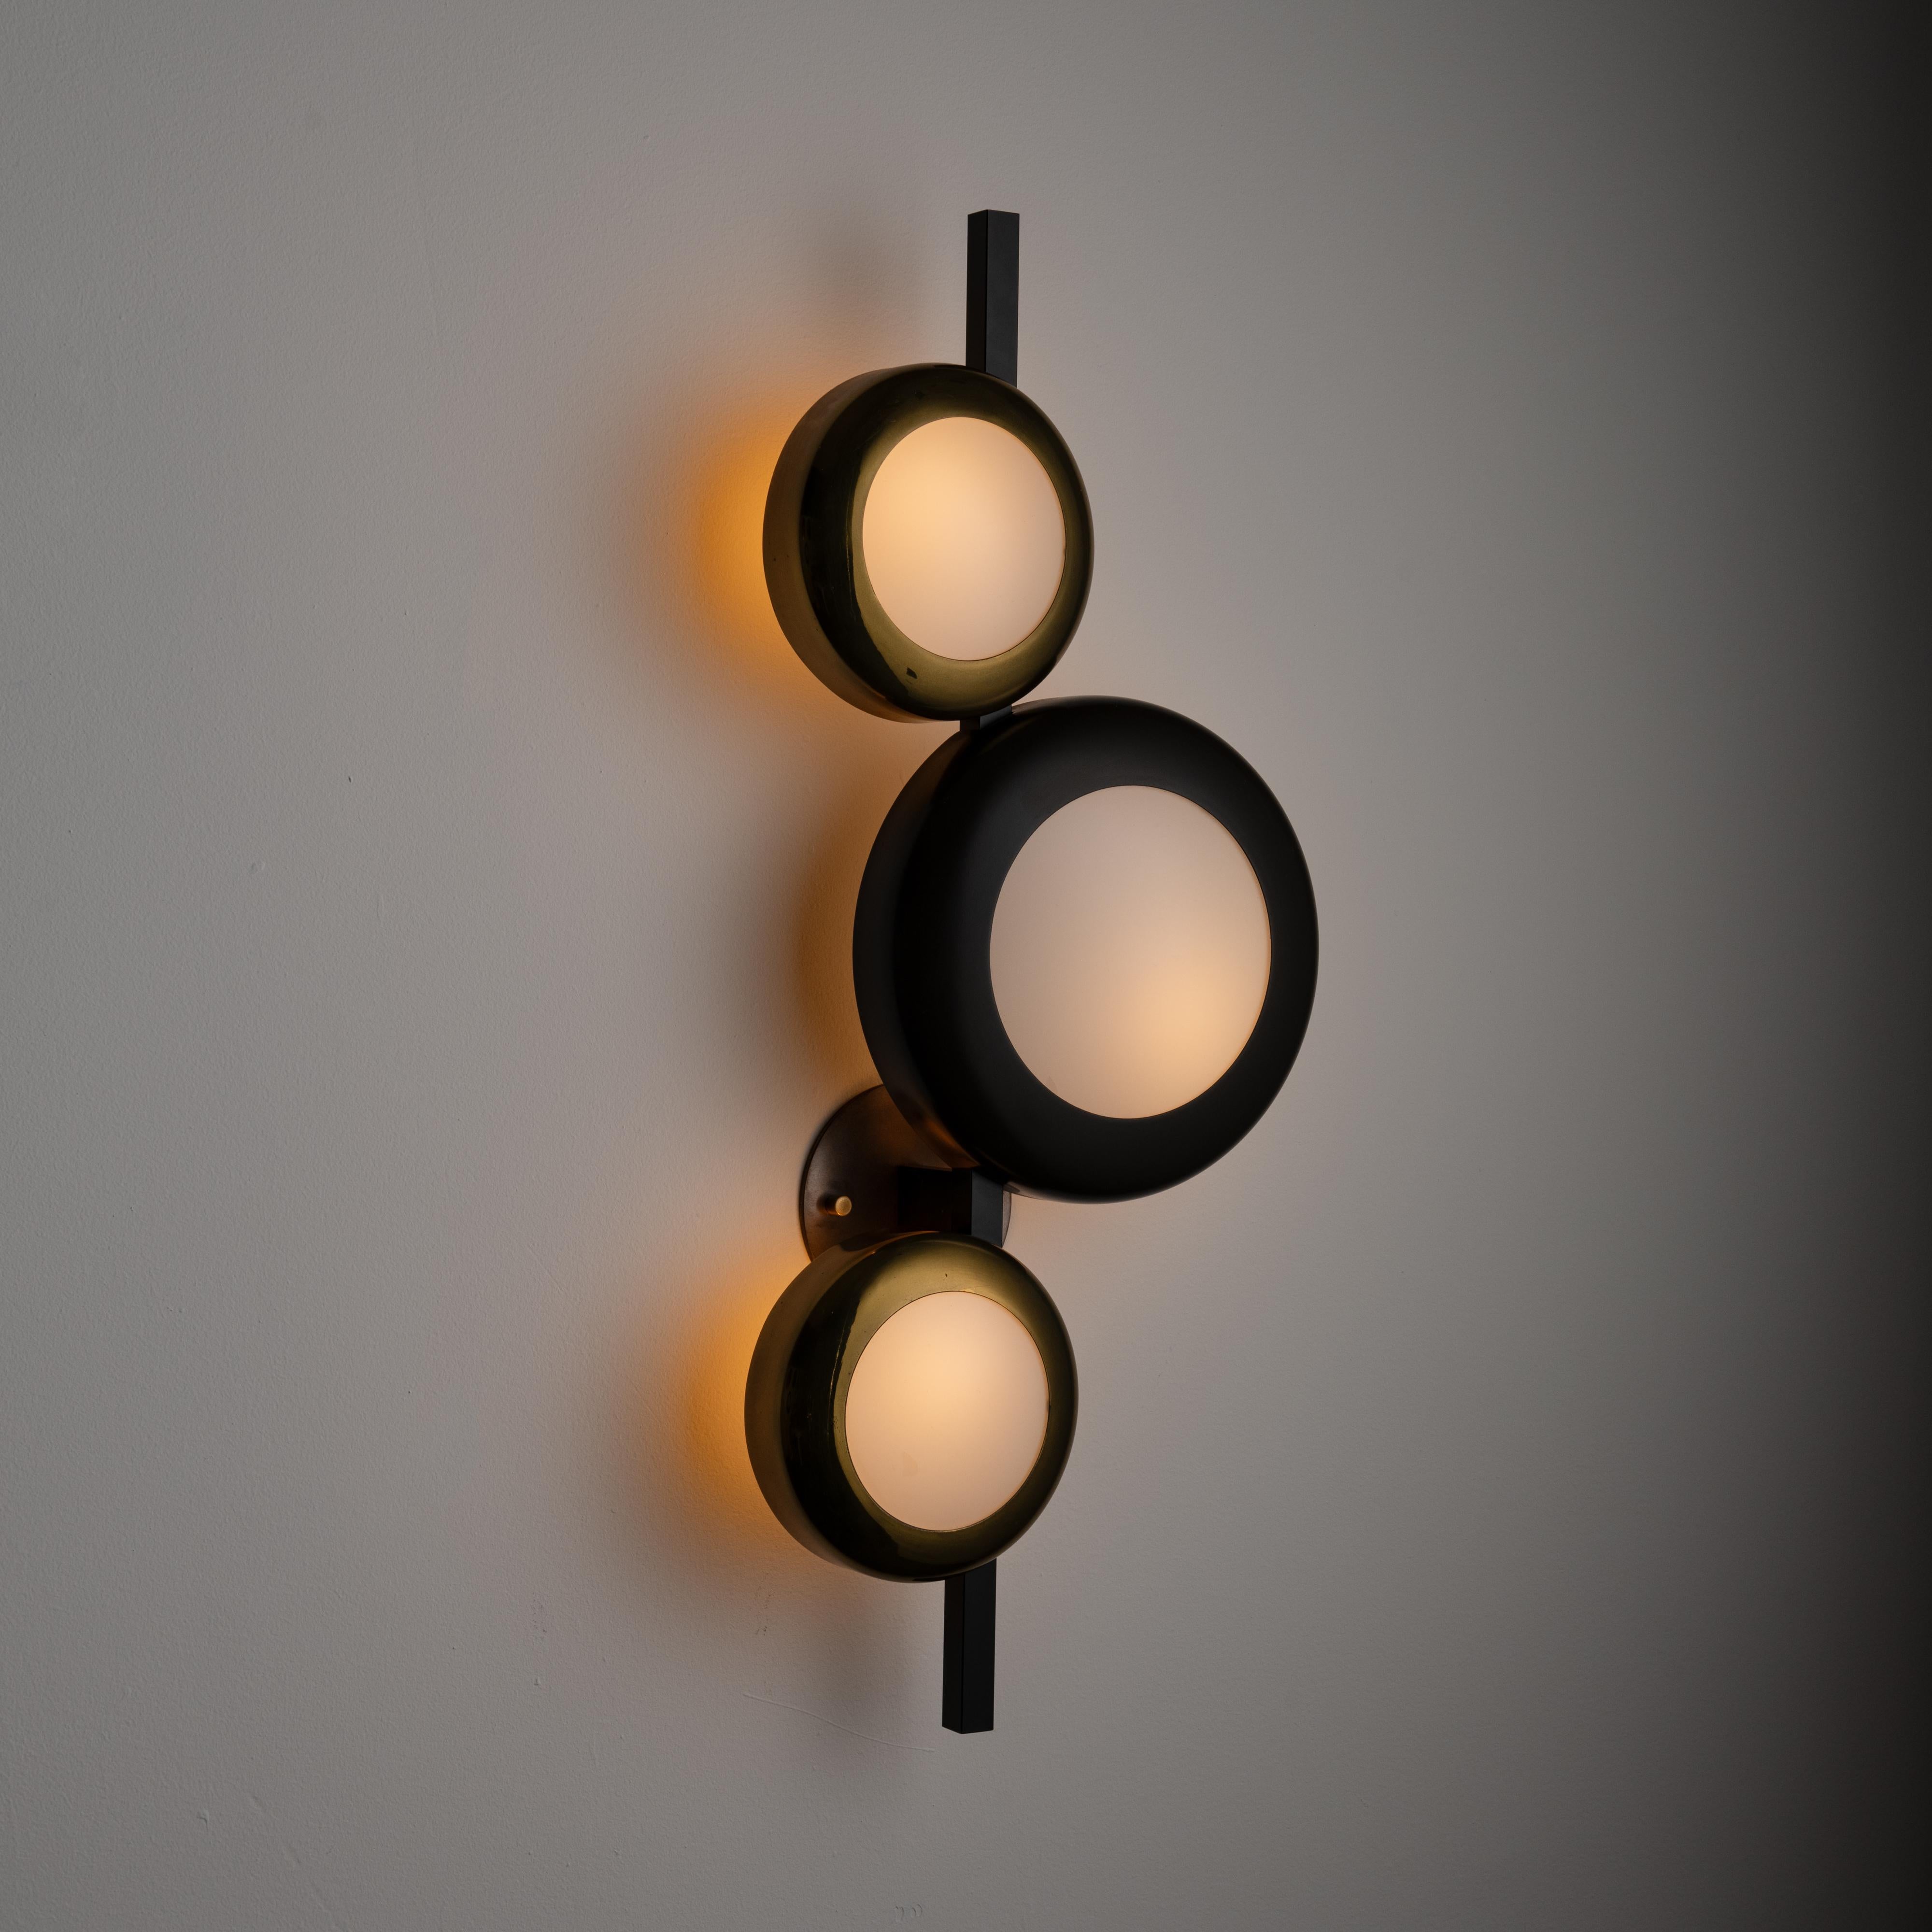 Rare model 580 Sconce by Oscar Torlasco for Lumi. Designed and manufactured in Italy, circa the 1950s. A three-piece surreal-looking wall sconce comprising of black enameled rims containing milk glass lens. Brass hardware and backings to finish this